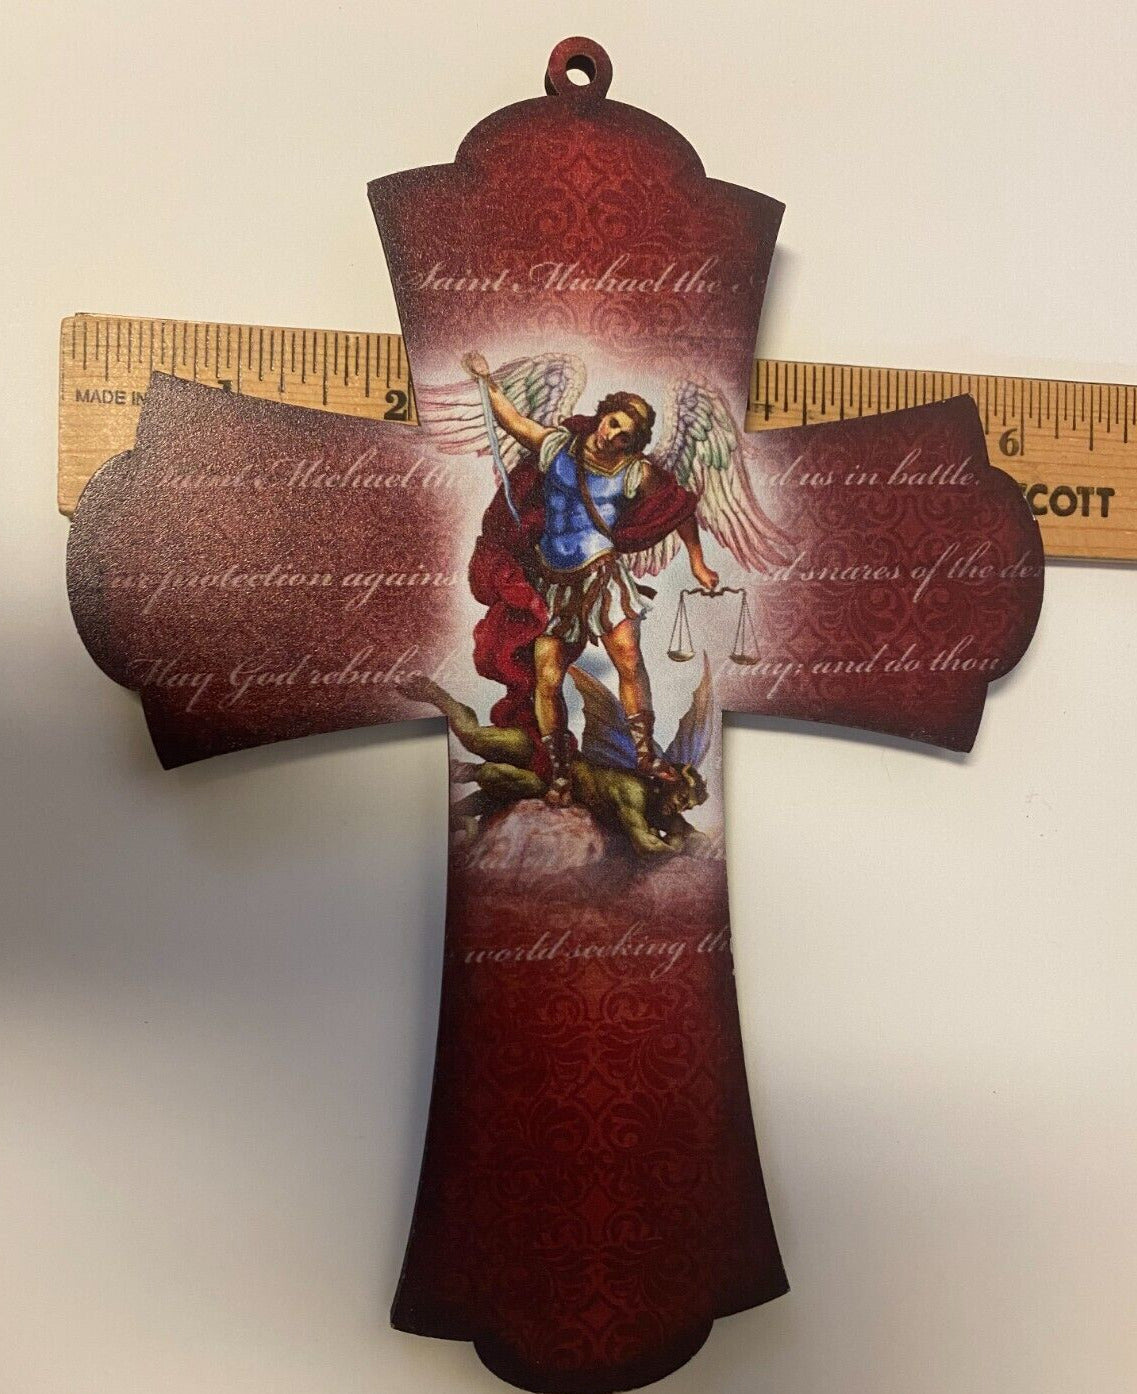 Saint Michael The Archangel 8" Laser Image on Thin Wood Cross, New - Bob and Penny Lord